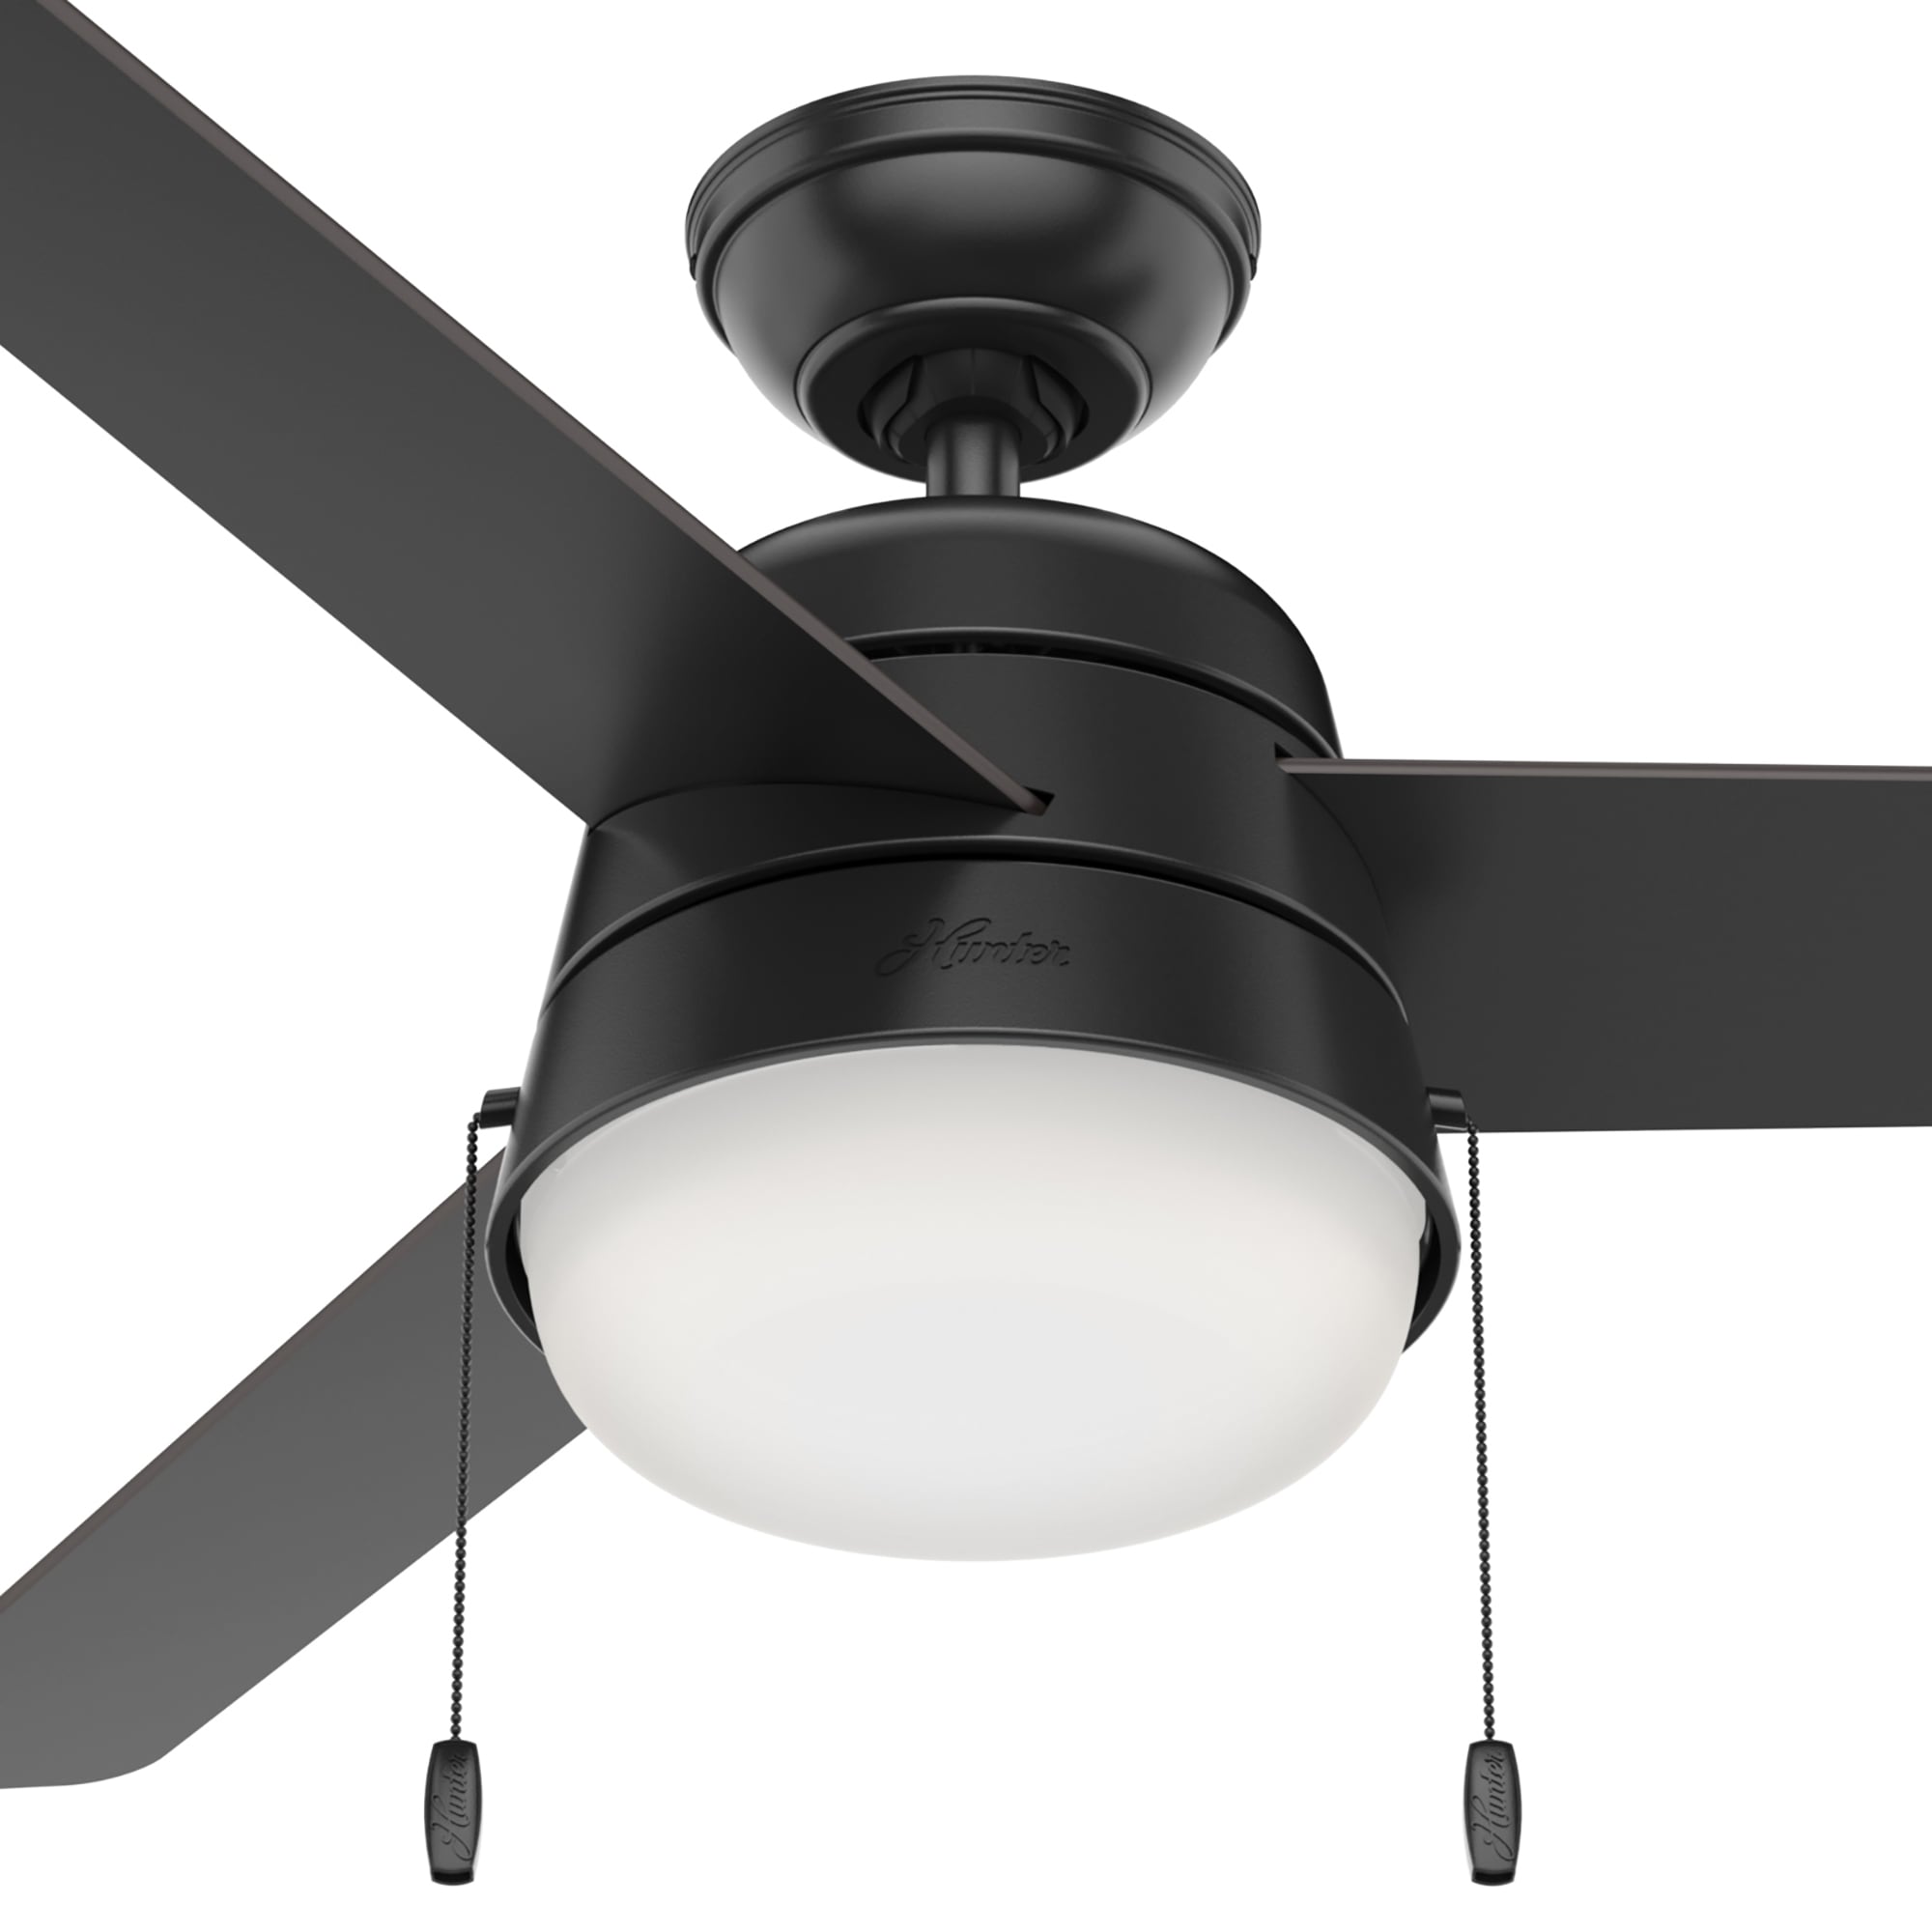 Details about   Hunter Fan 52 inch Matte Black Outdoor Ceiling Fan with Light Kit and Pull Chain 